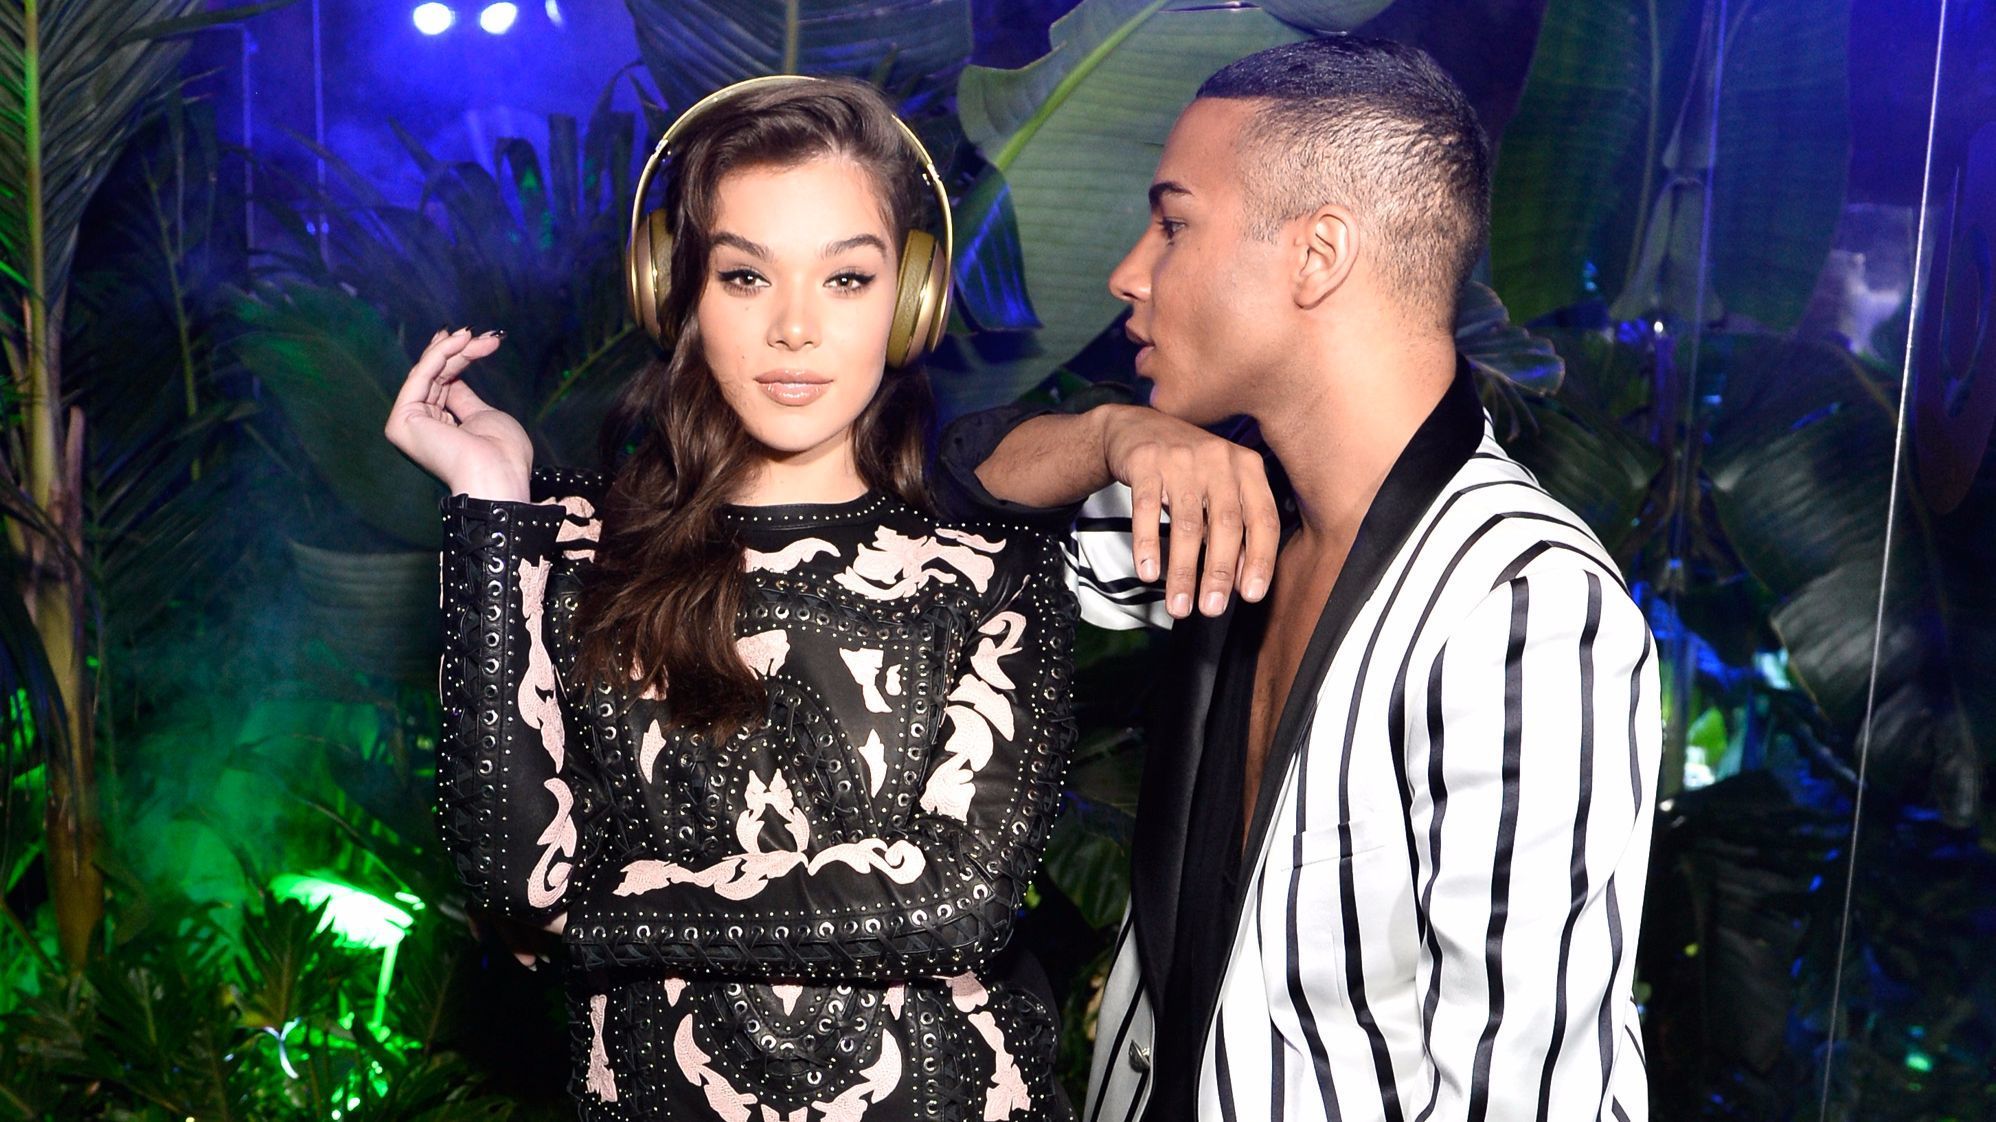 Actress Hailee Steinfeld and Balmain creative director Olivier Rousteing at the Balmain and Beats by Dre collaboration party in Beverly Hills.